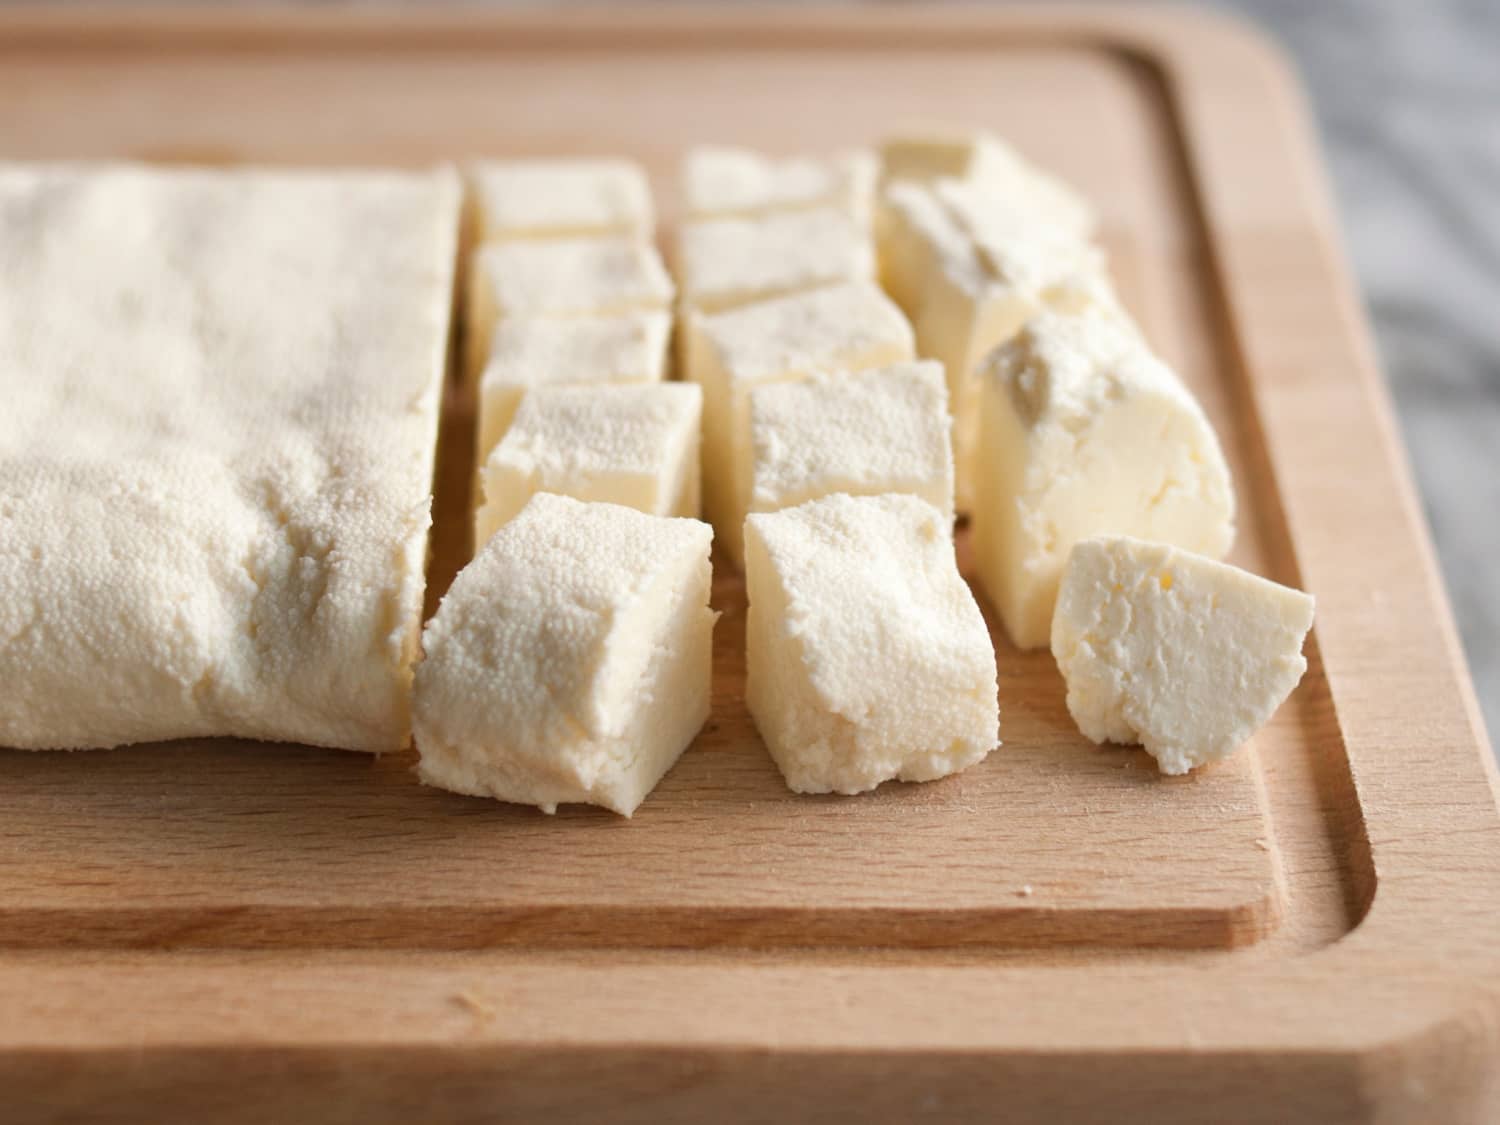 How To Make Paneer Cheese in 30 Minutes | Kitchn